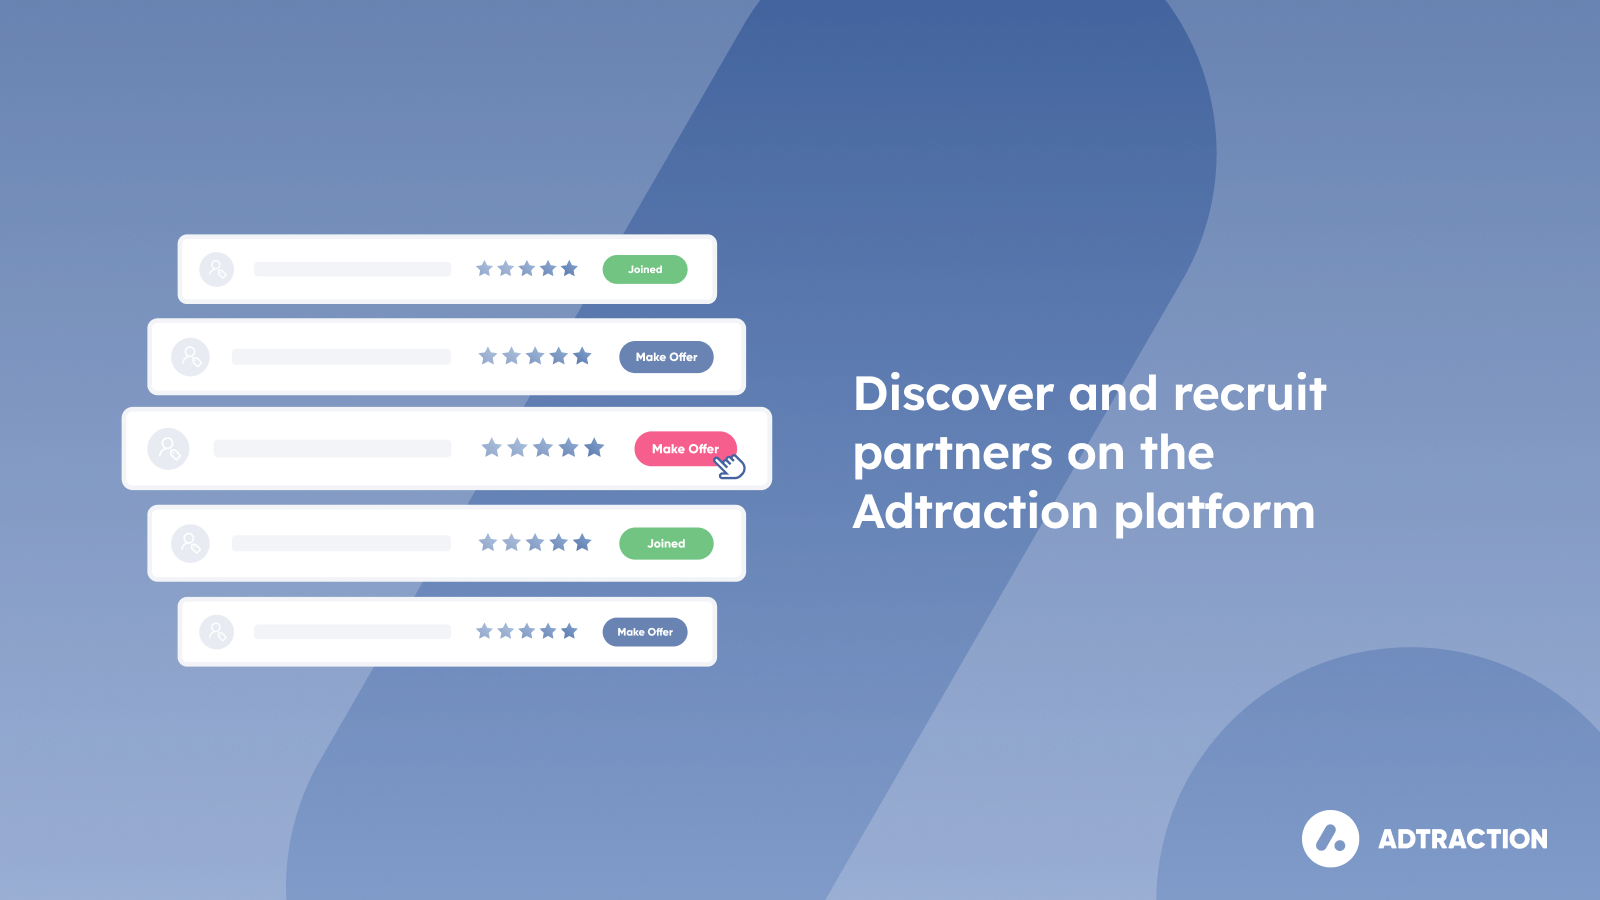 Discover and recruit partners on the Adtraction platform